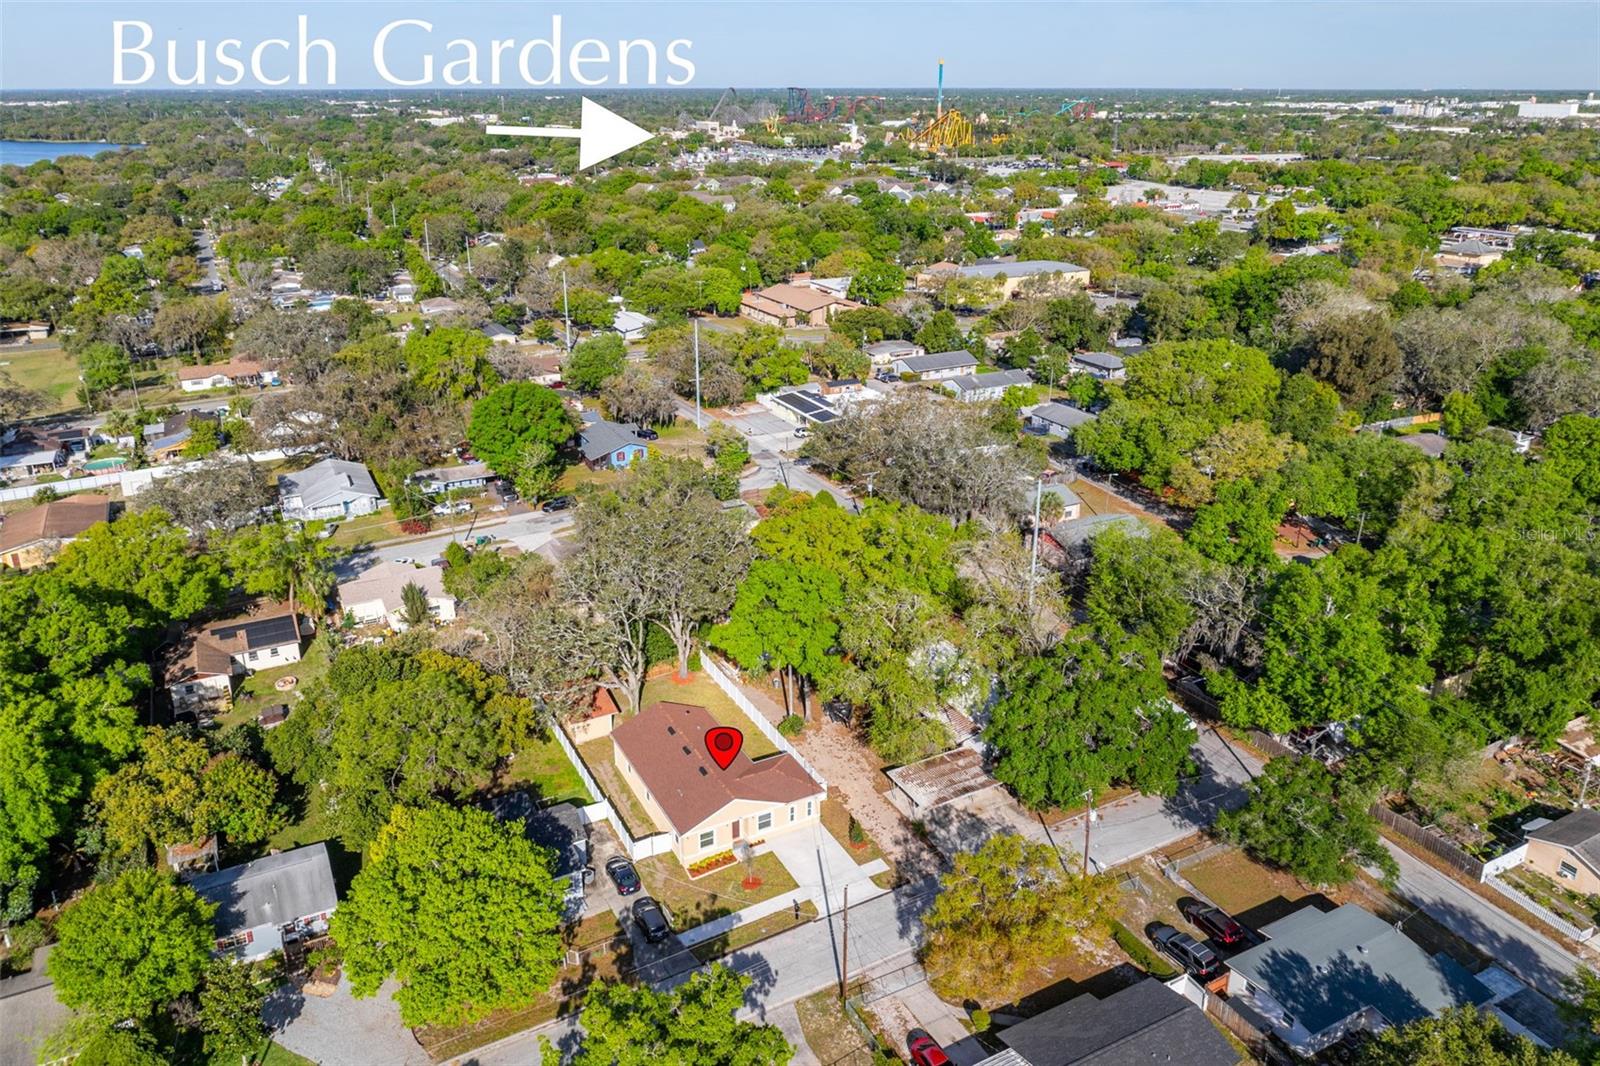 Aerial- House (shows property house w shed, fence,..)with BUSCH GARDENS in distance -marked